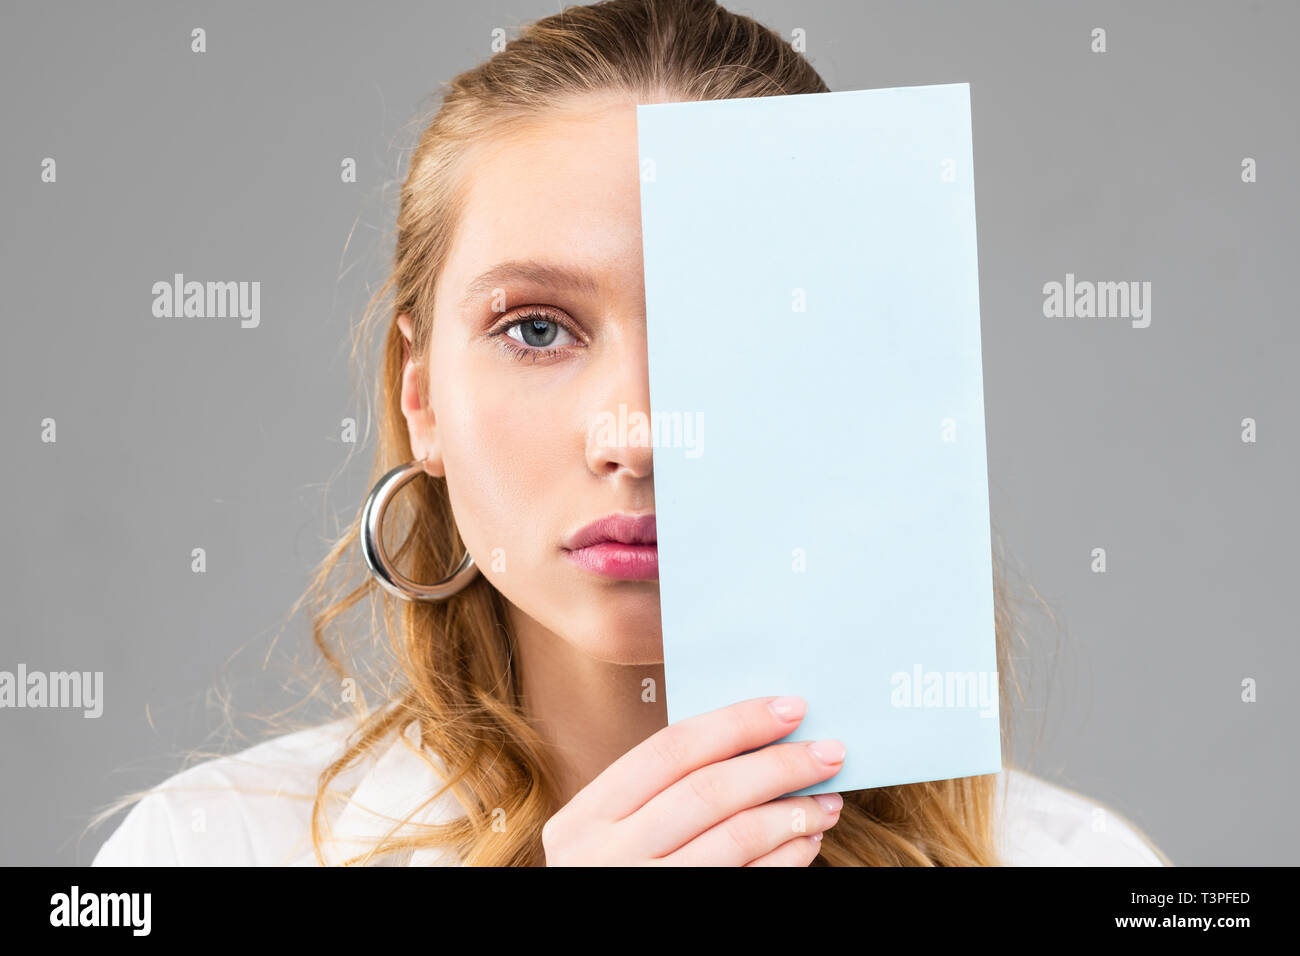 Emotionless long-haired female with blue eyes and pink lips Stock Photo